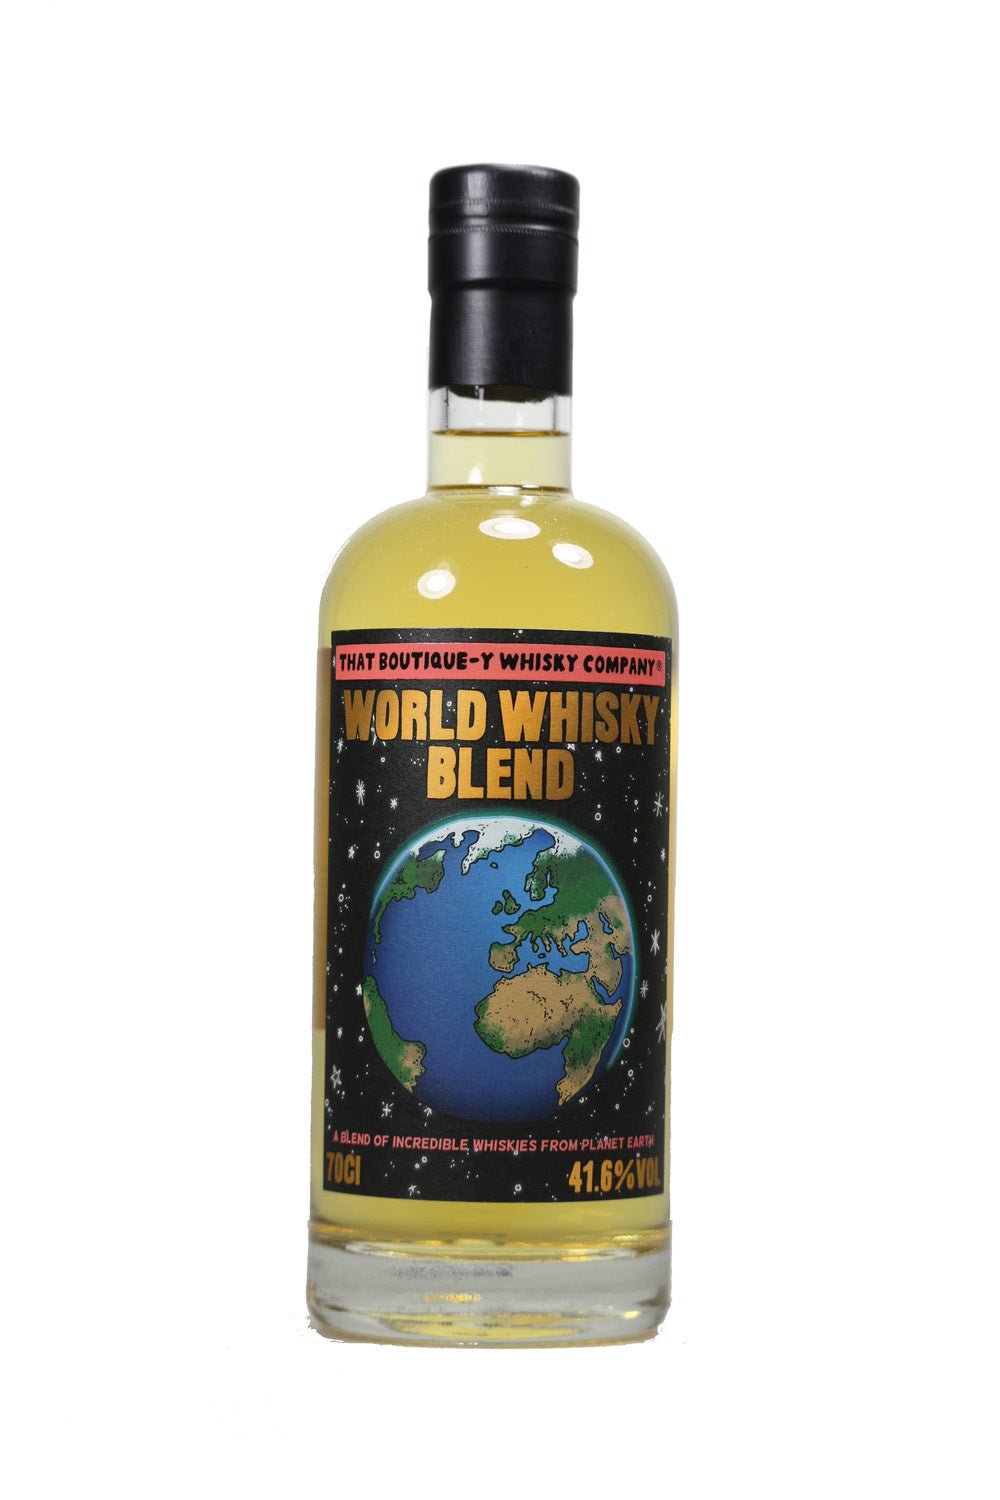 TBWC World Whisky Blend That Boutique-y Whisky Company 41,6% vol. 700ml - Maltimore